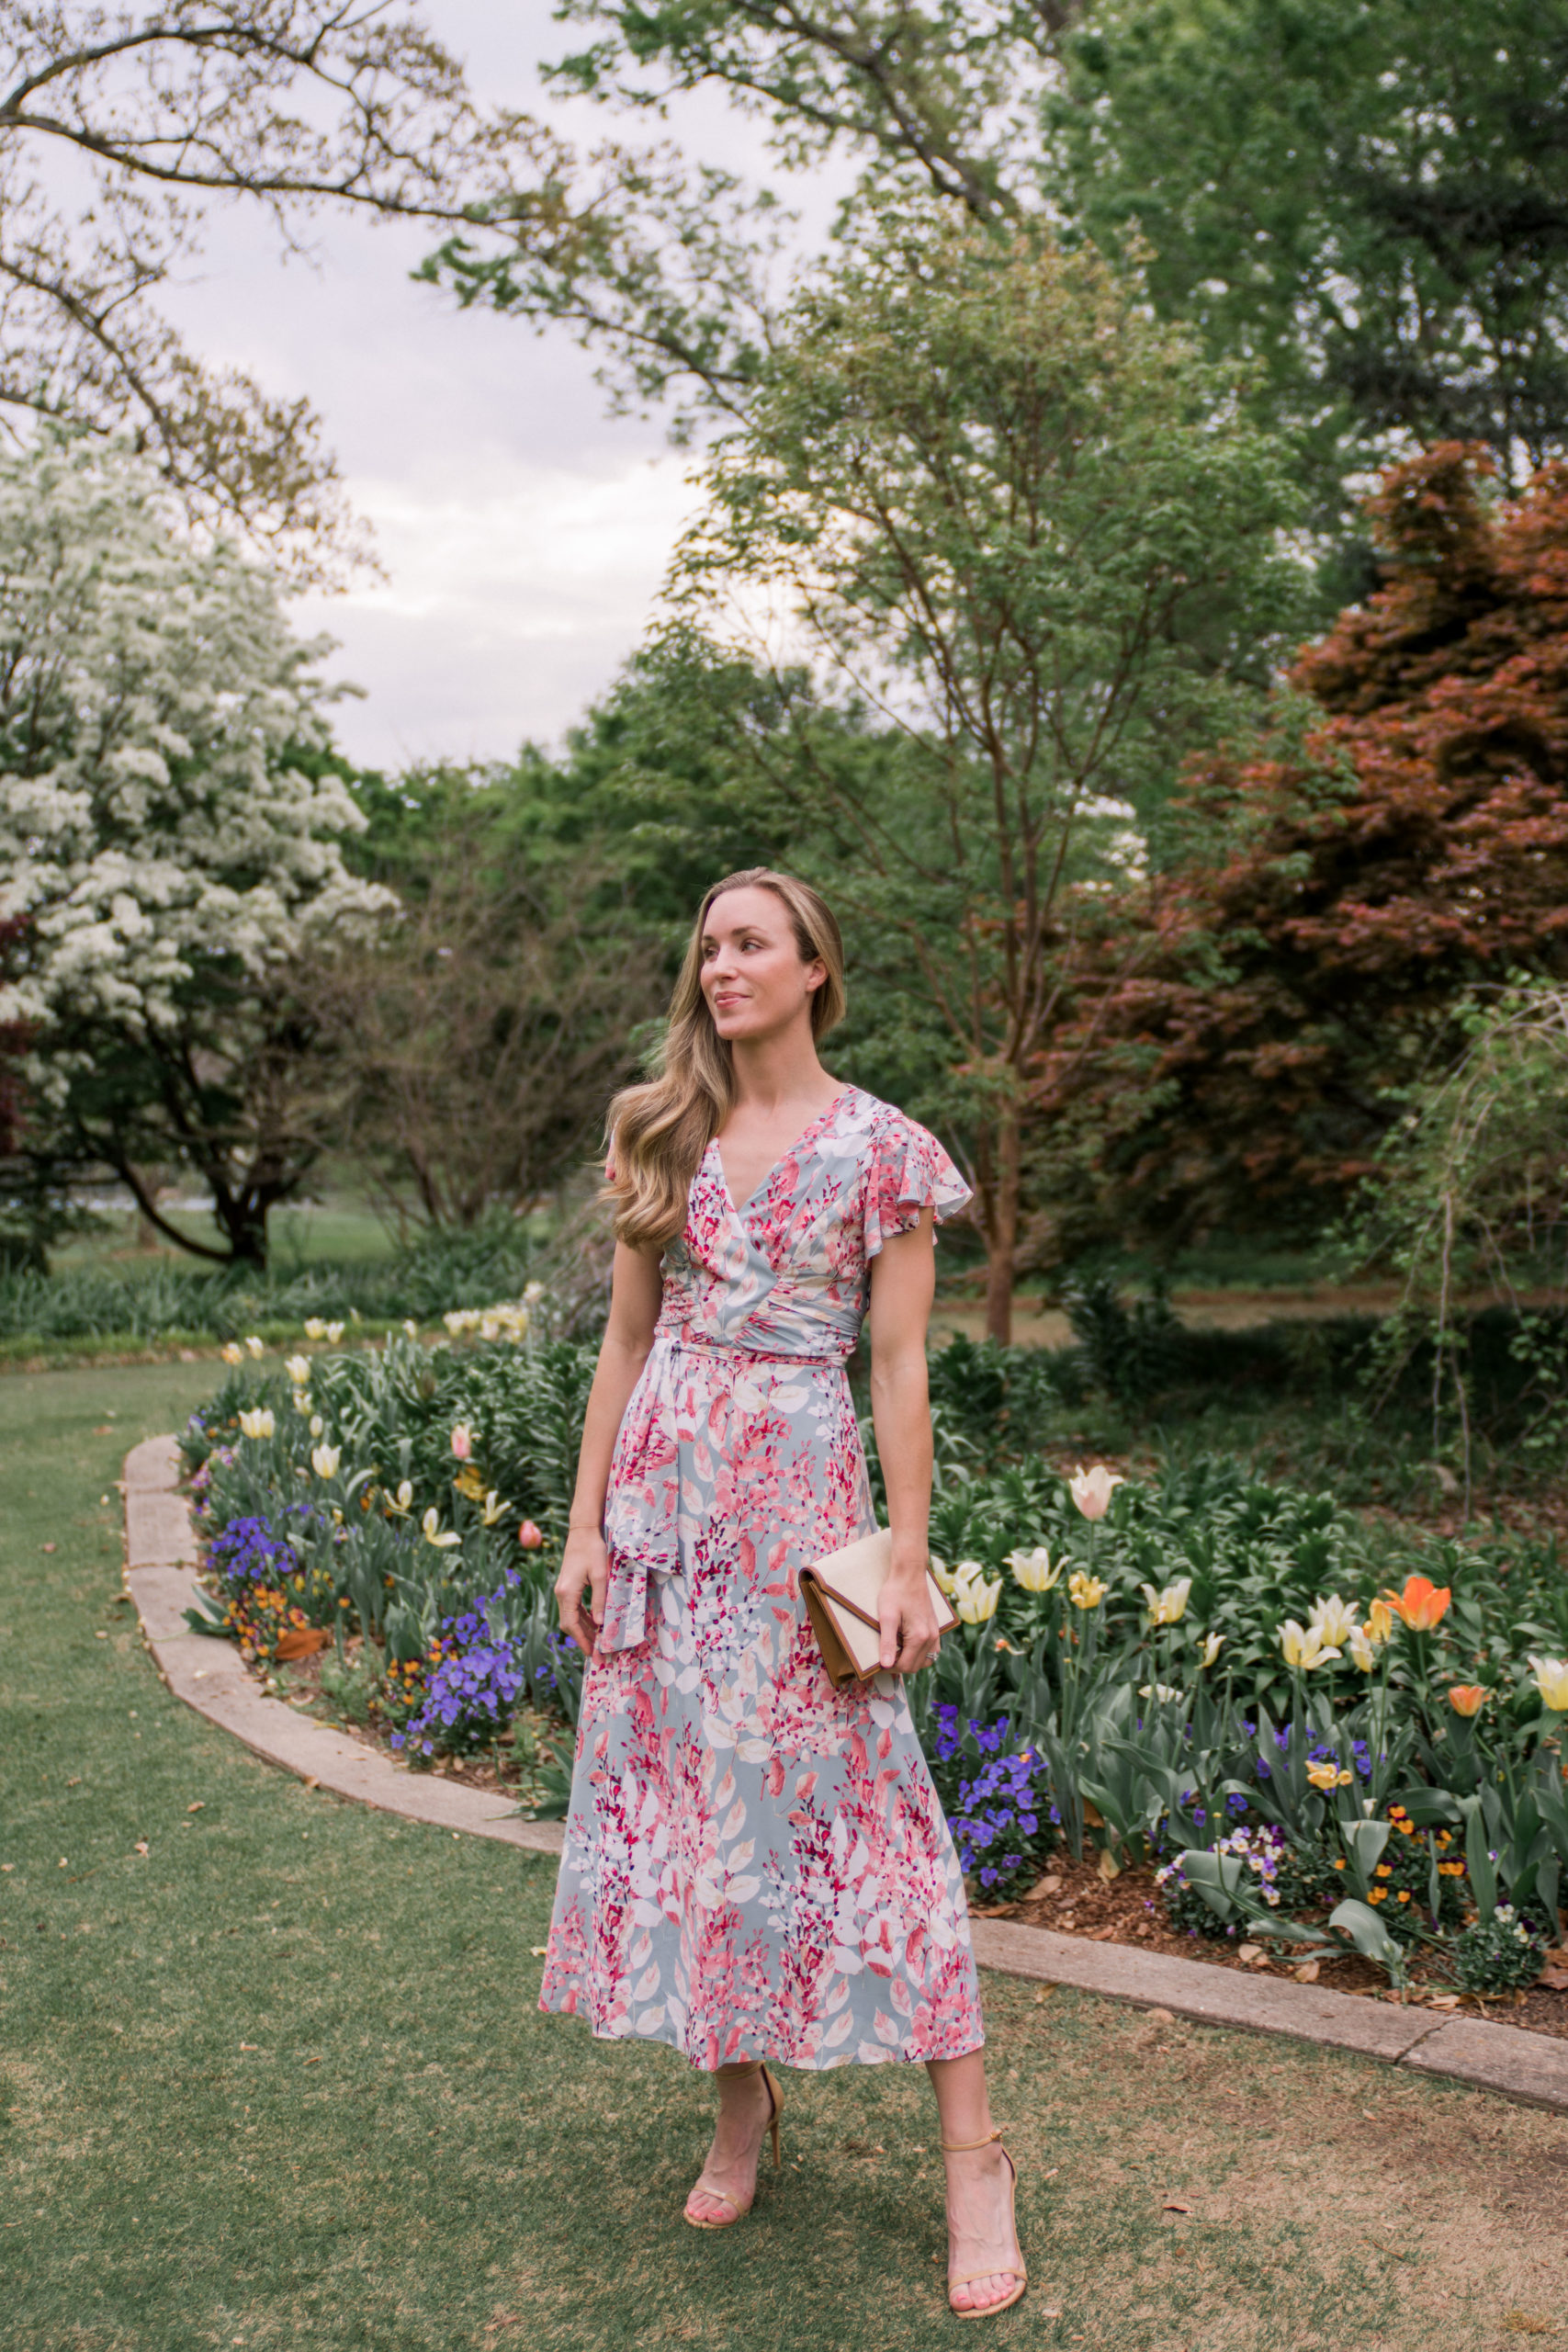 Easter Outfit Ideas: 5 Looks for Church, Brunch, & More